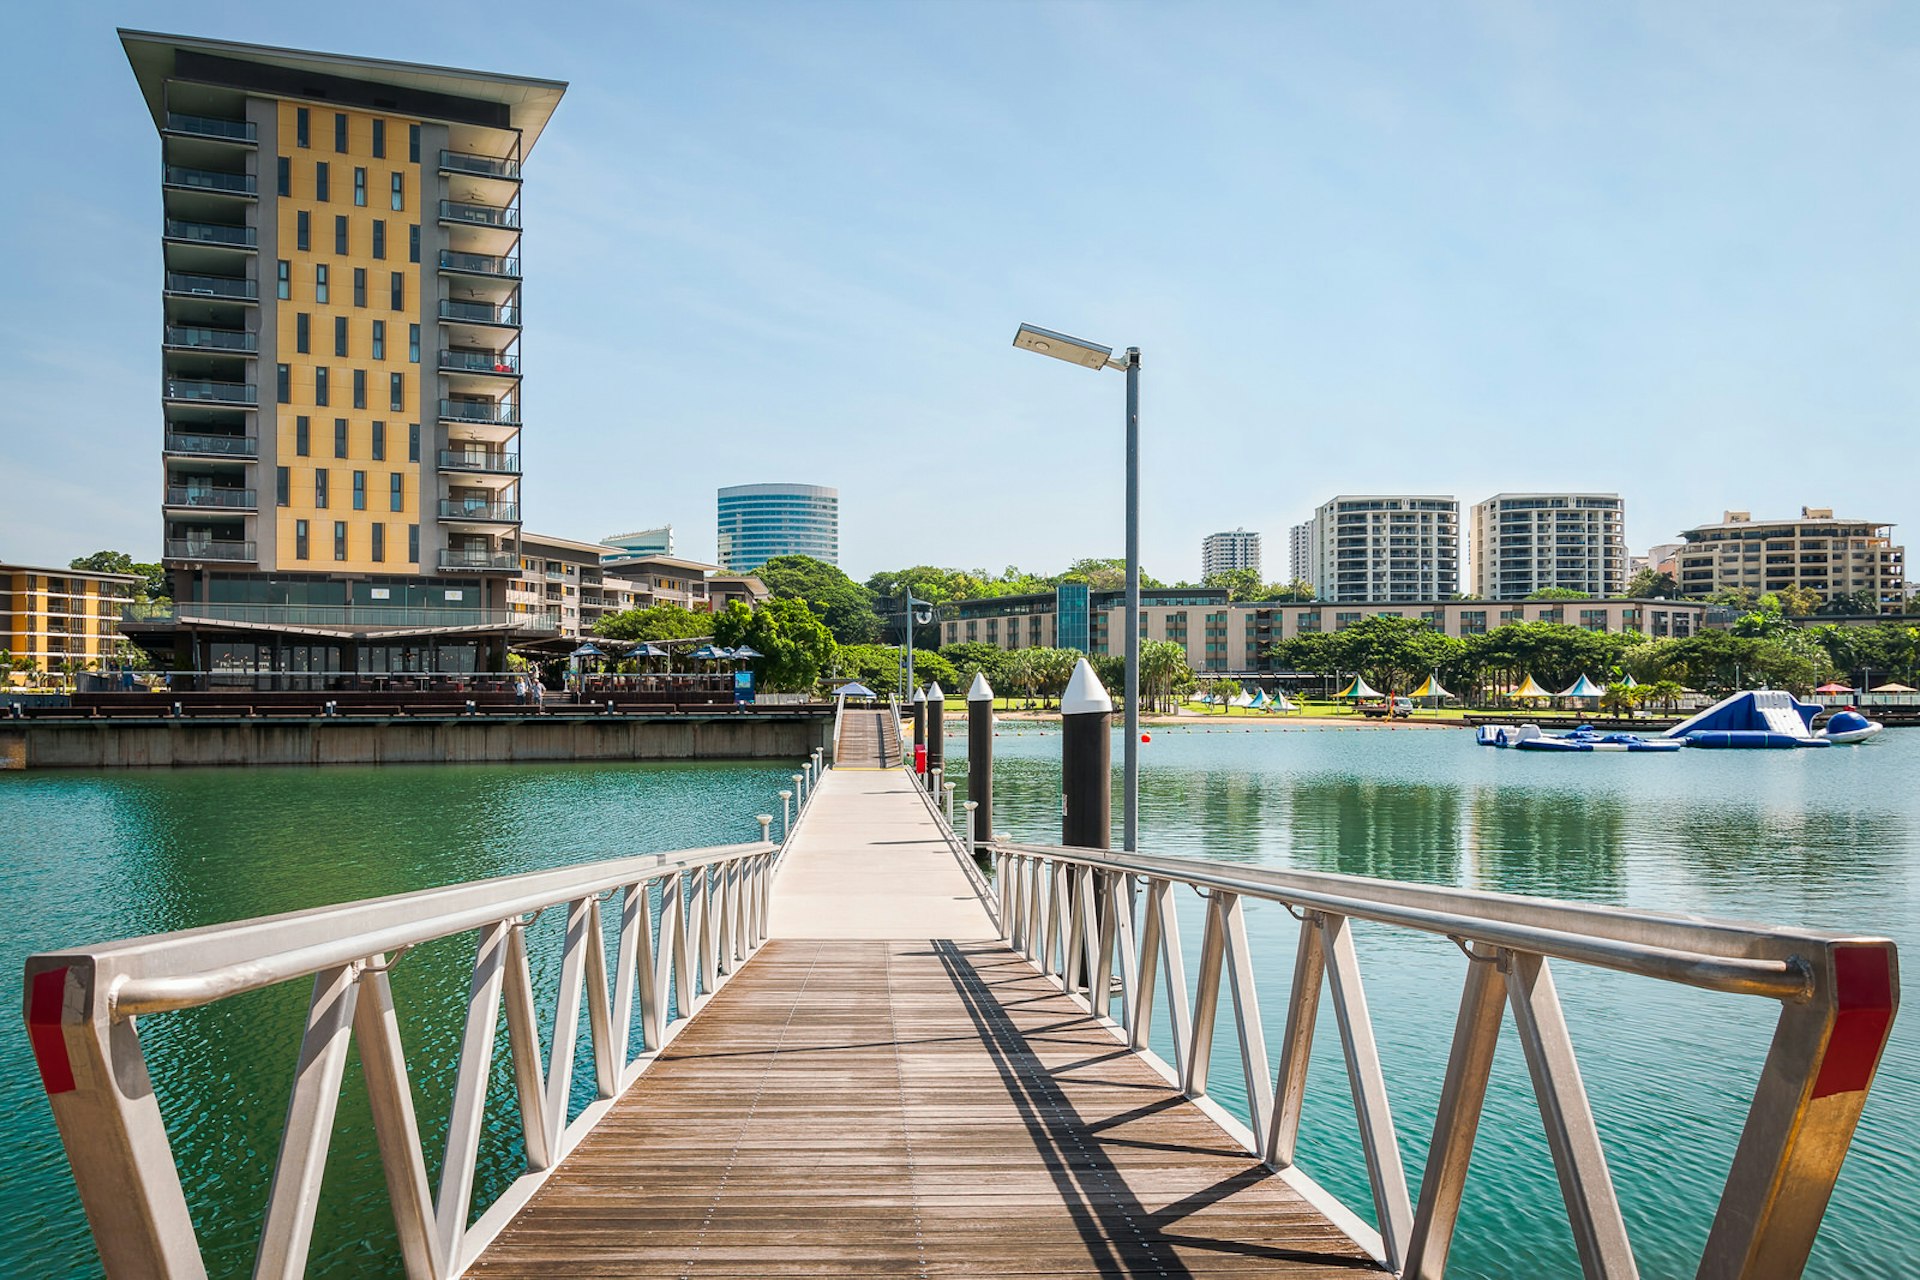 Scenic spot at Darwin Waterfront Wharf with a footbridge over water running from the foreground to the background where it meets a number of modern buildings and skyscrapers